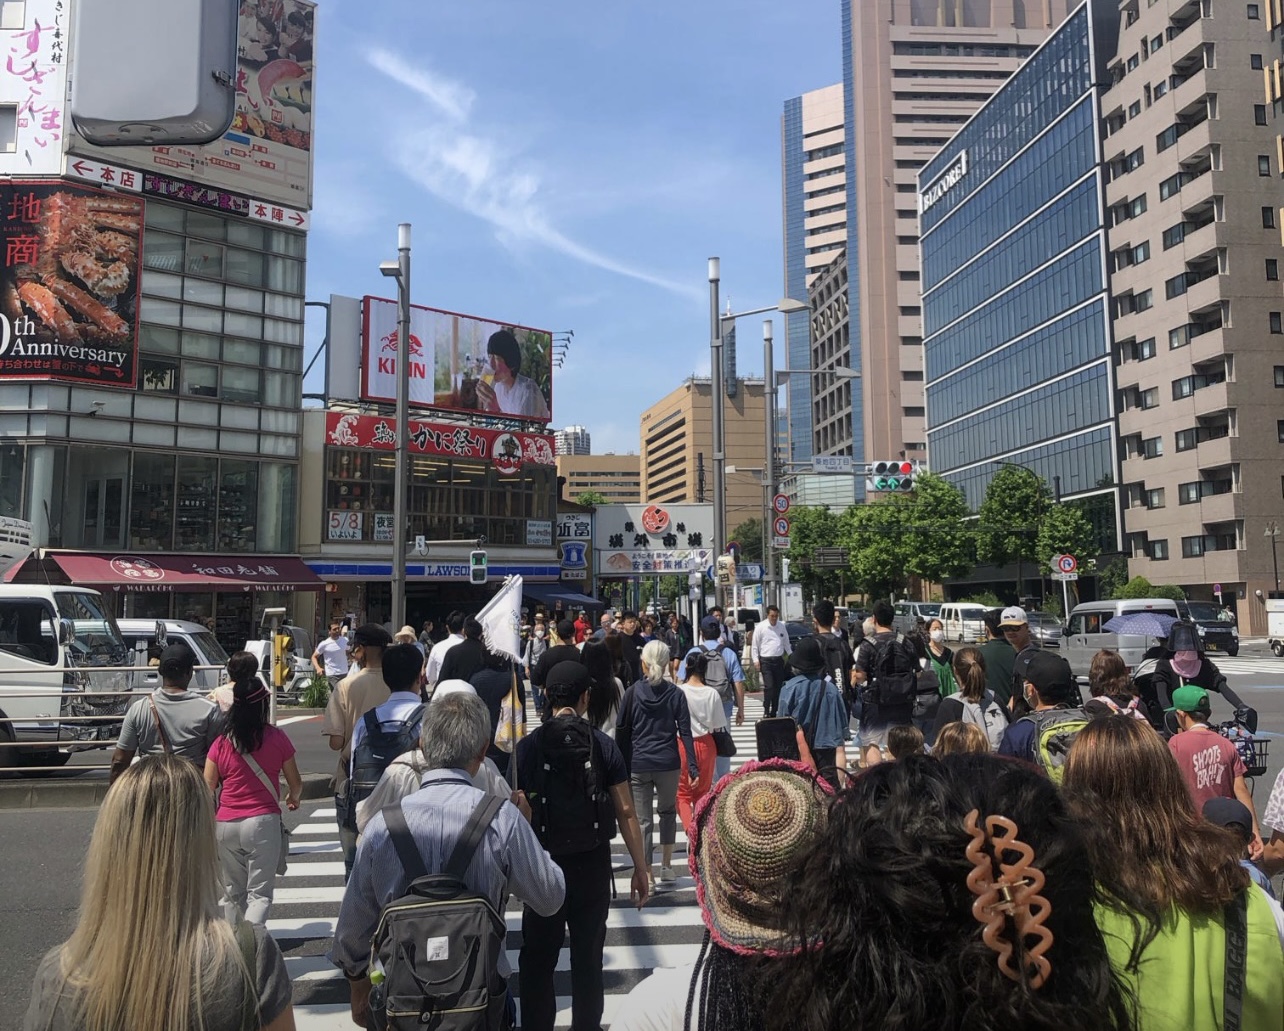 A crowded crosswalk in the heart of Tokyo